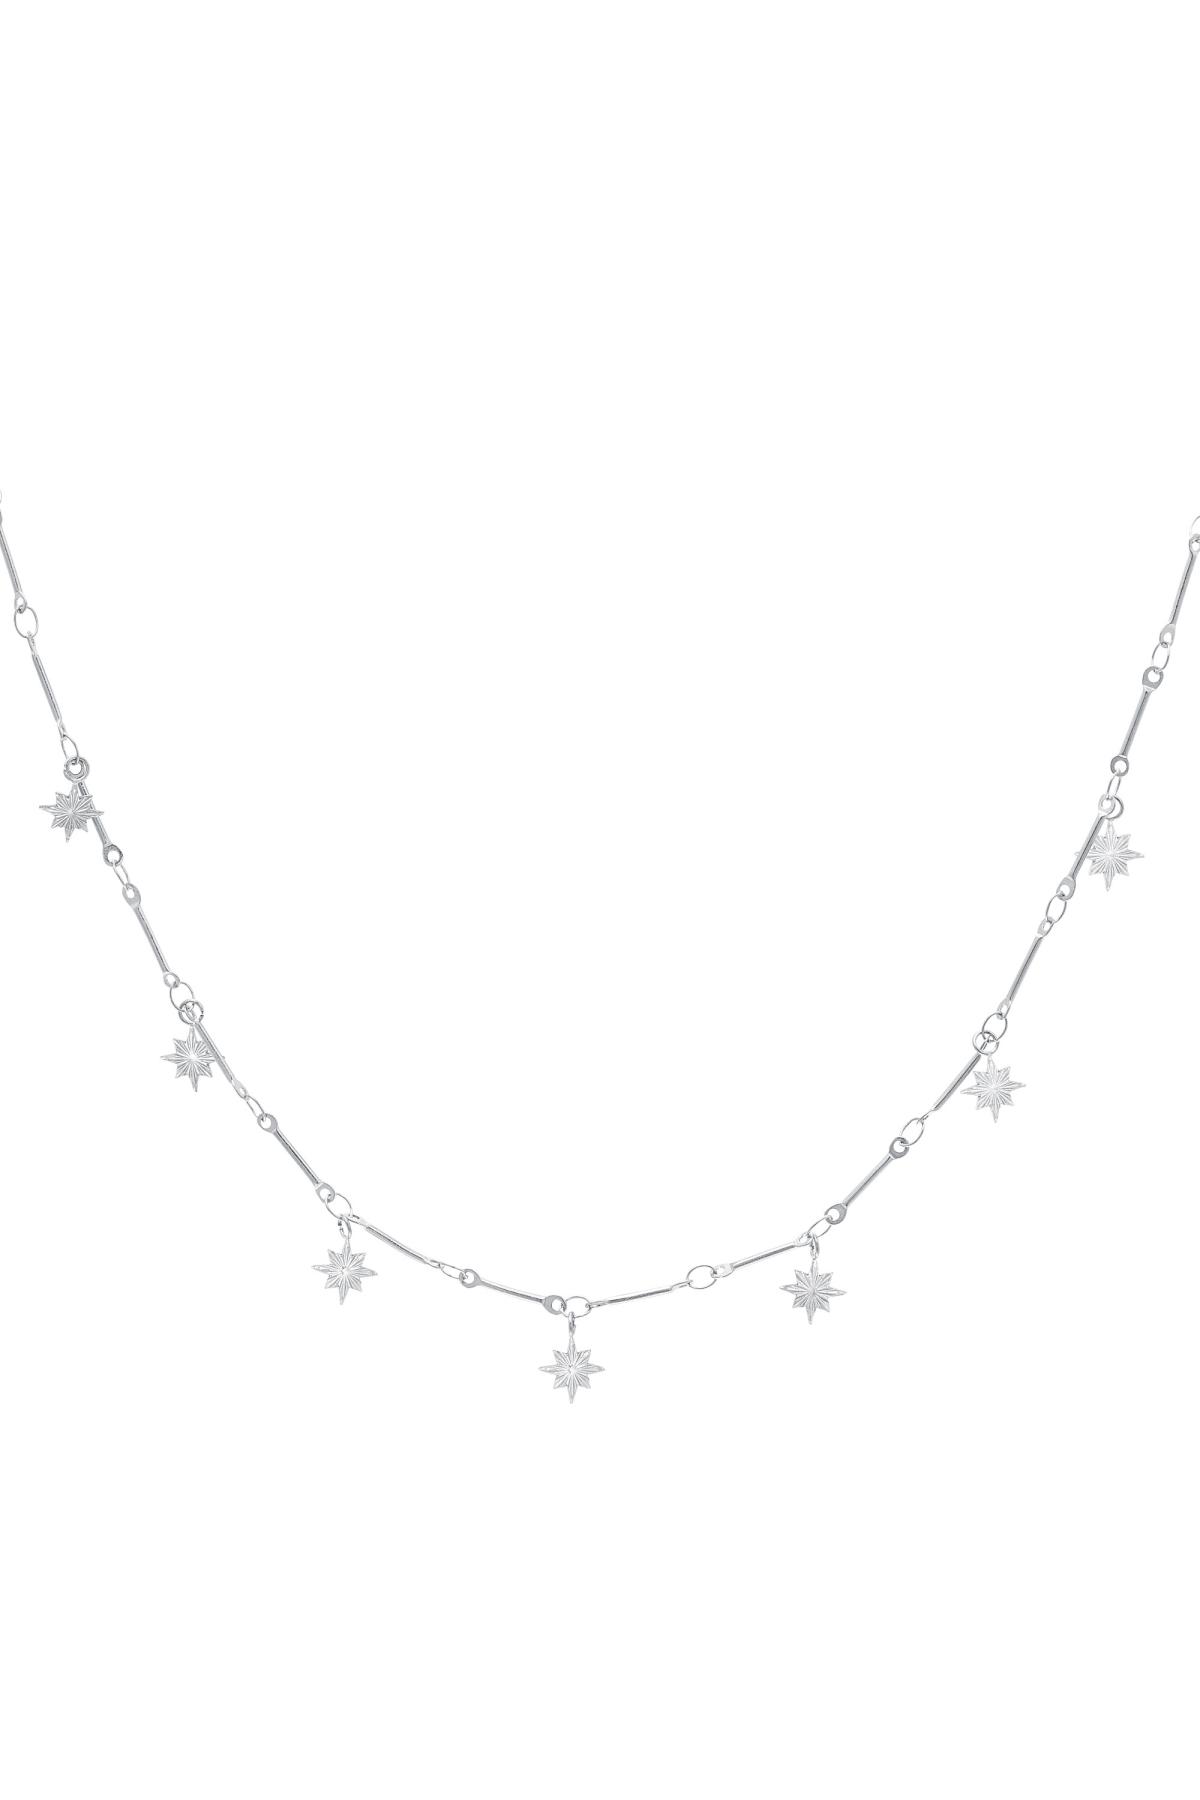 Necklace North Star Silver Stainless Steel h5 